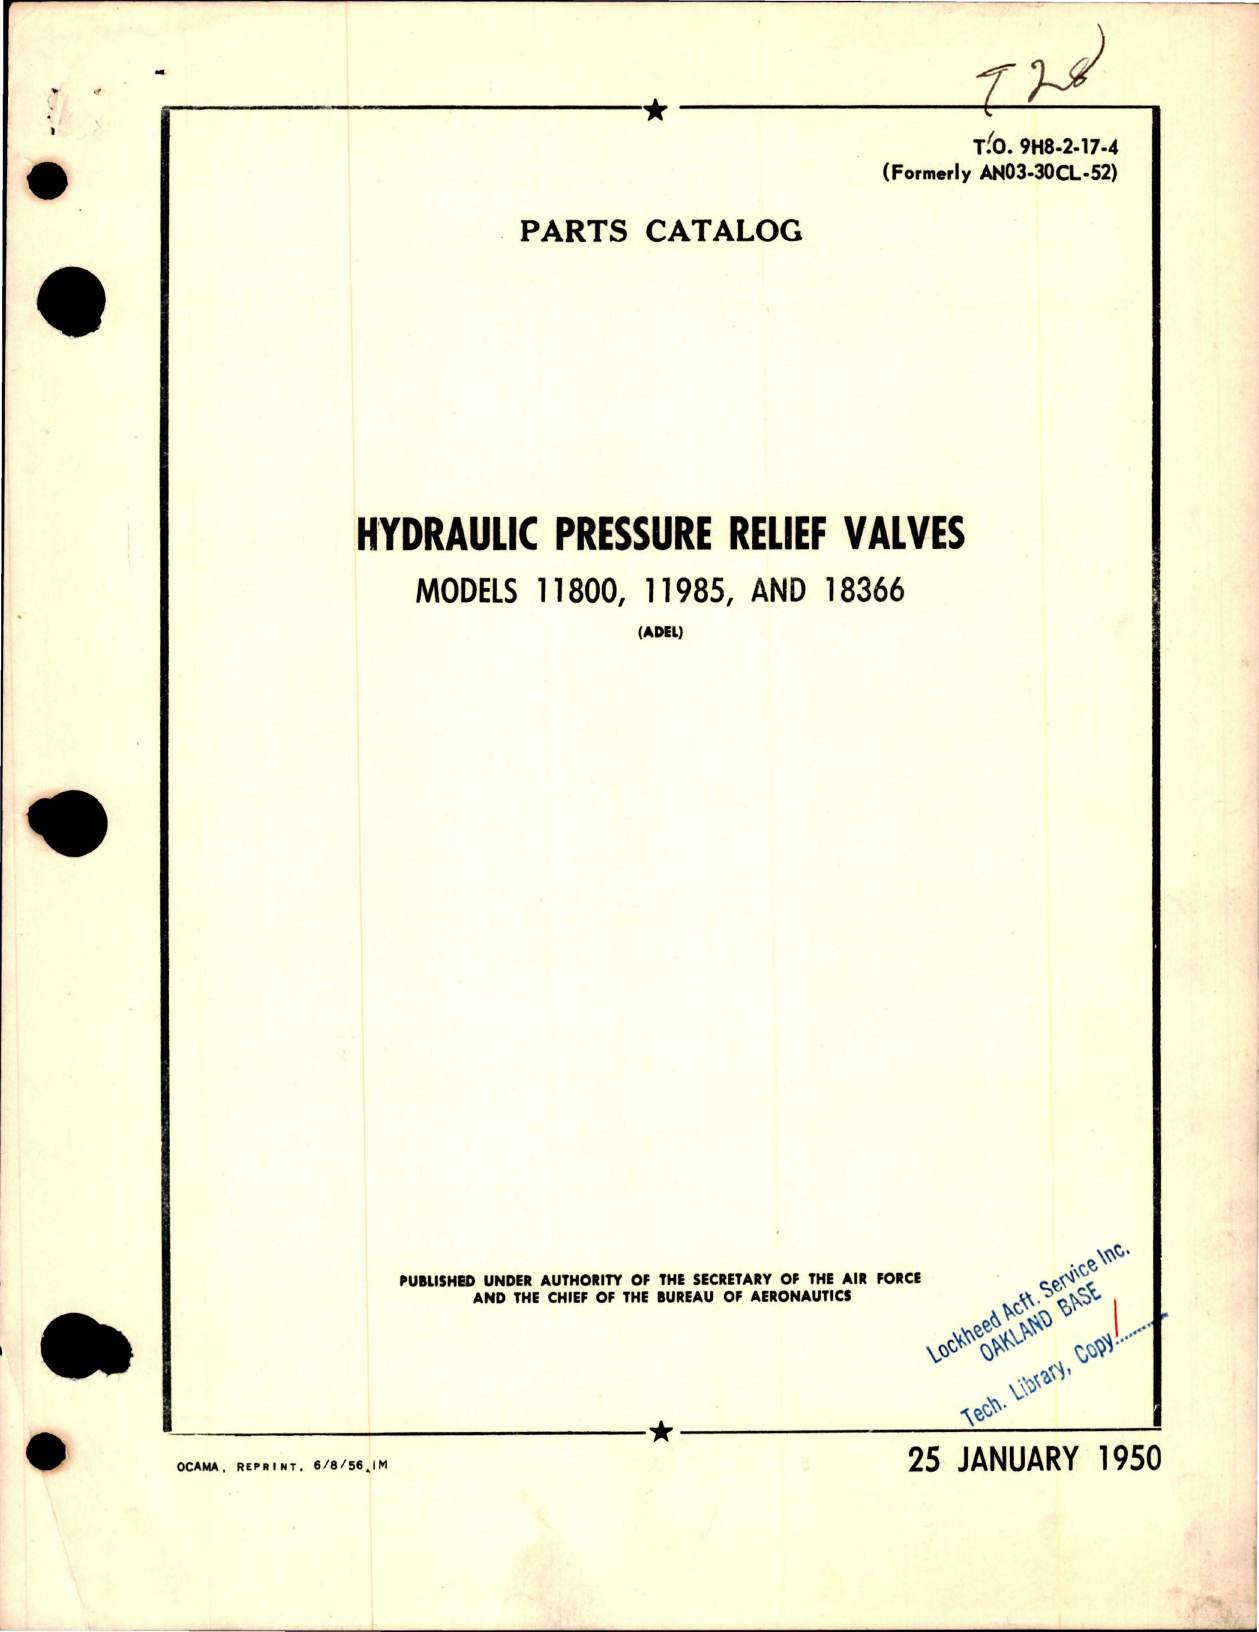 Sample page 1 from AirCorps Library document: Parts Catalog for Hydraulic Pressure Relief Valves - Models 11800, 11985, and 18366 